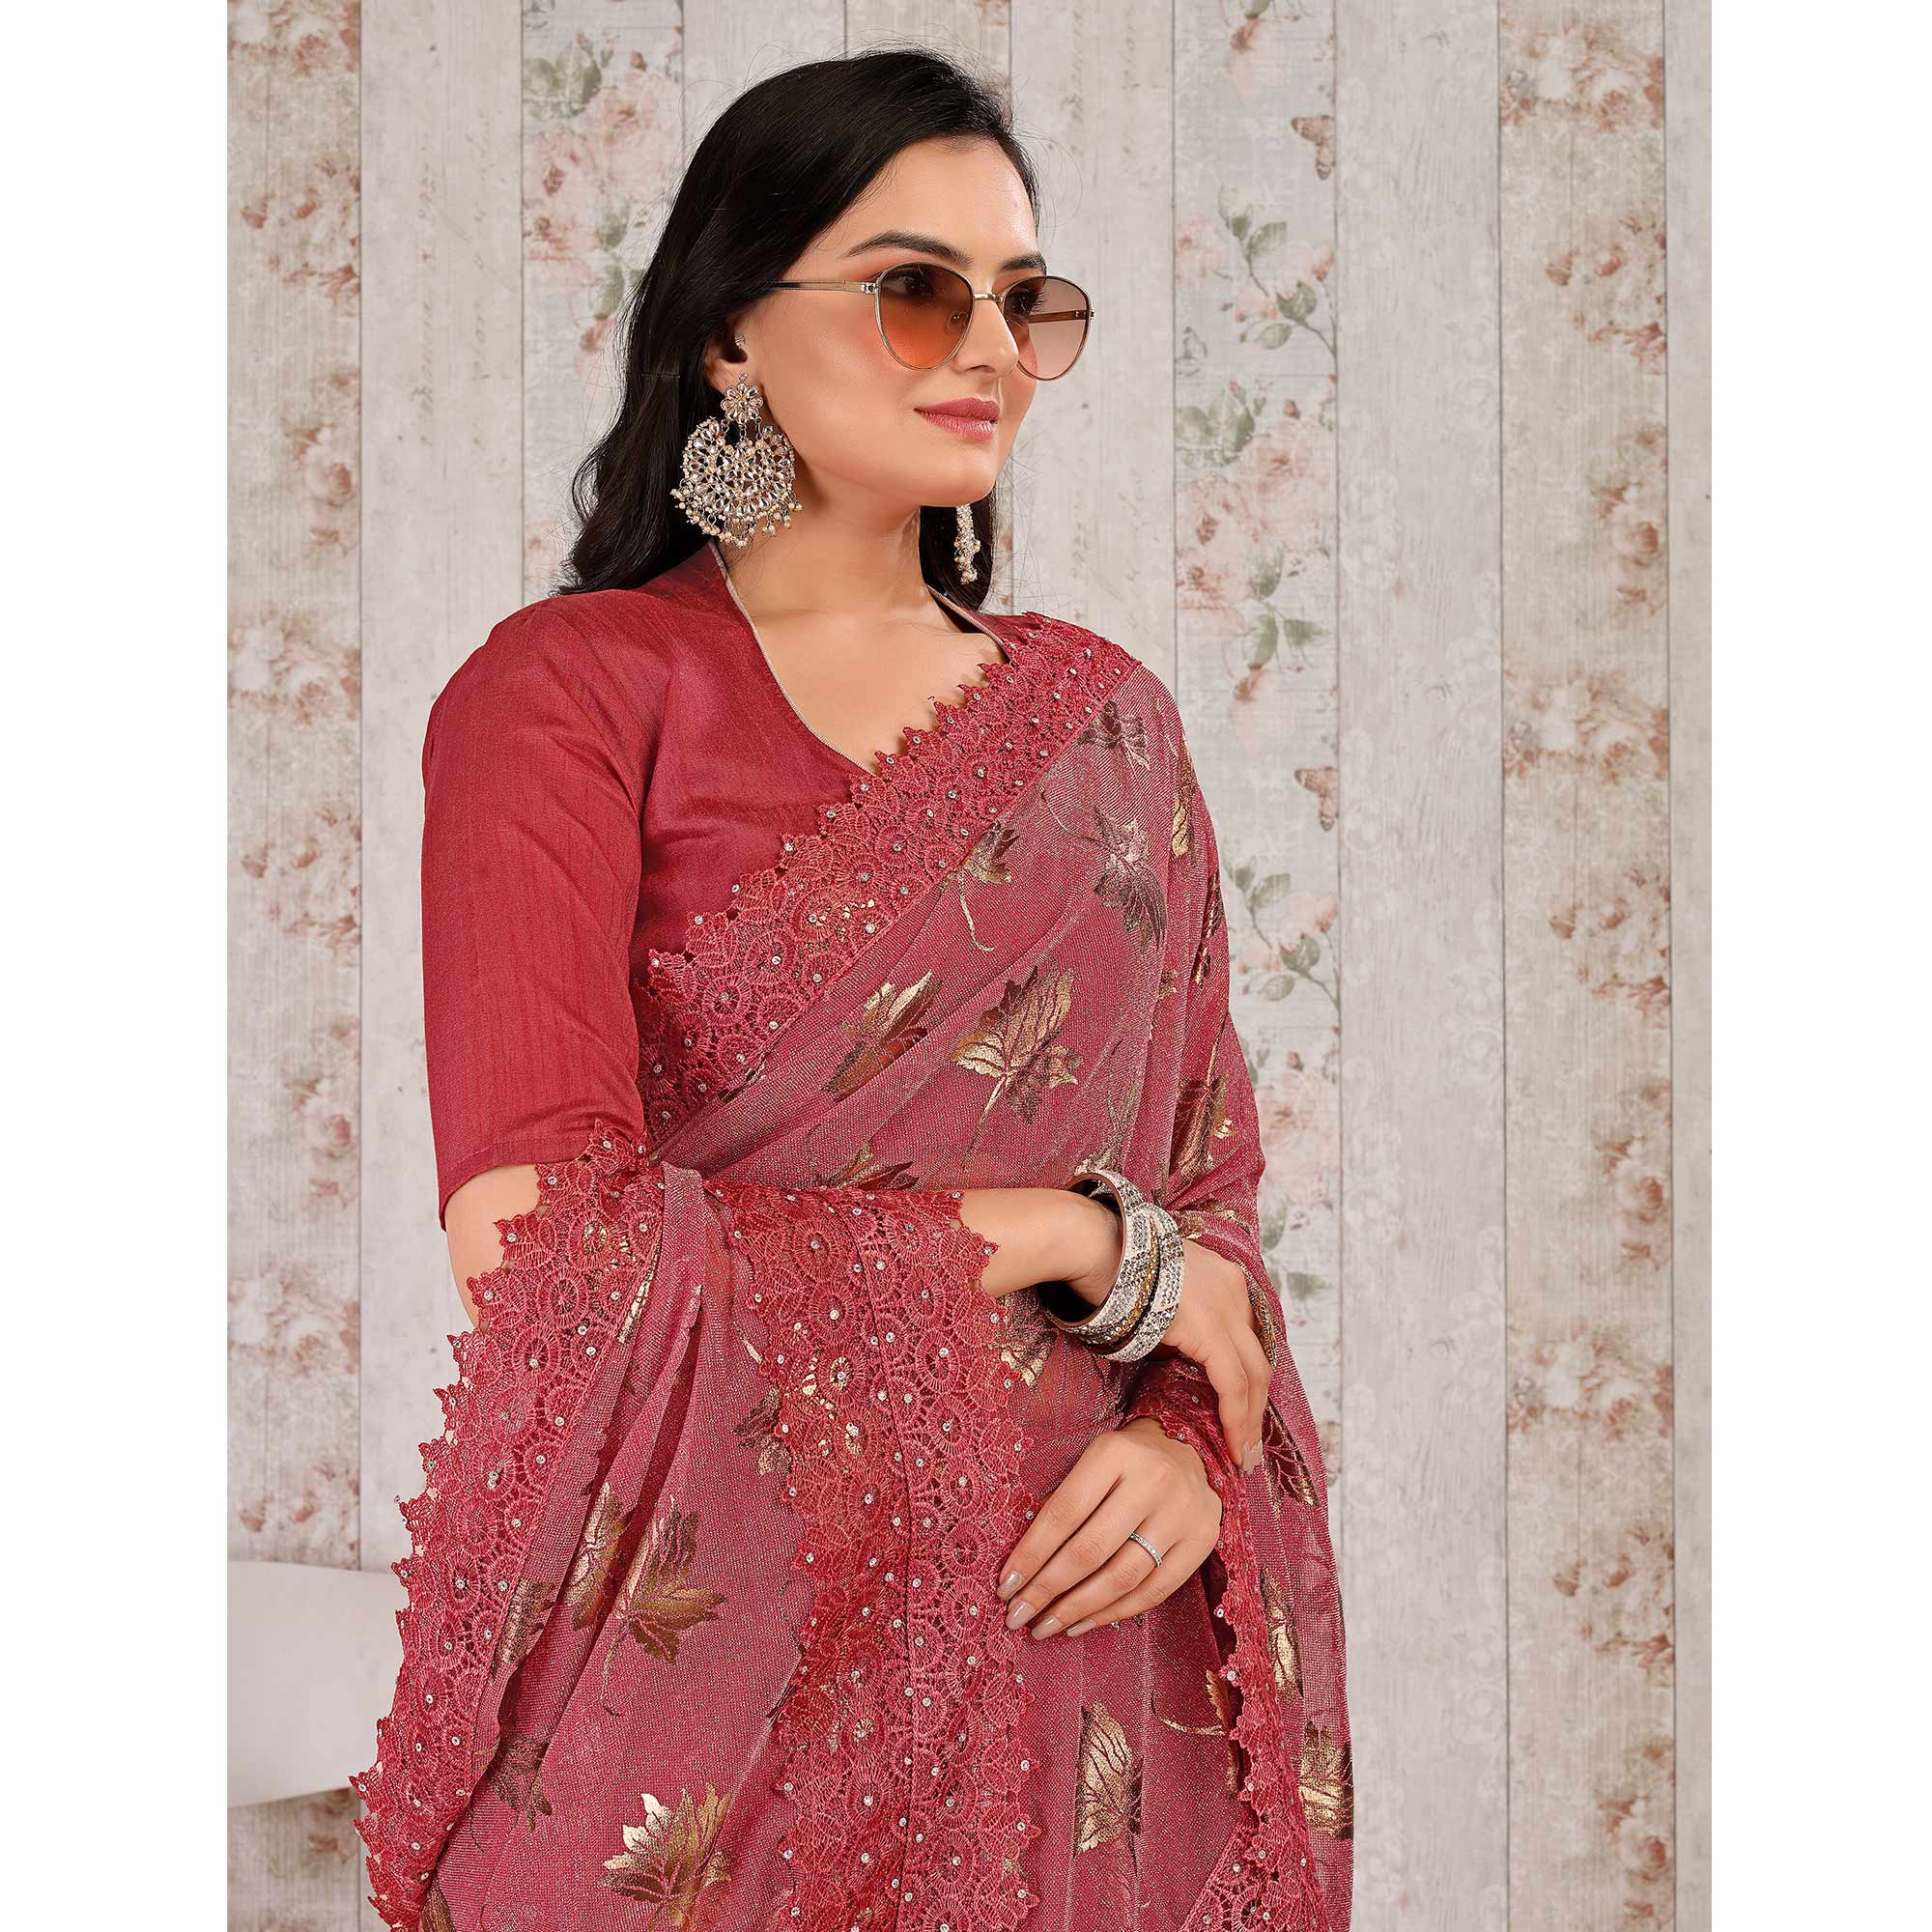 Pink Foil Printed Lycra Saree With Embroidered Lace Border